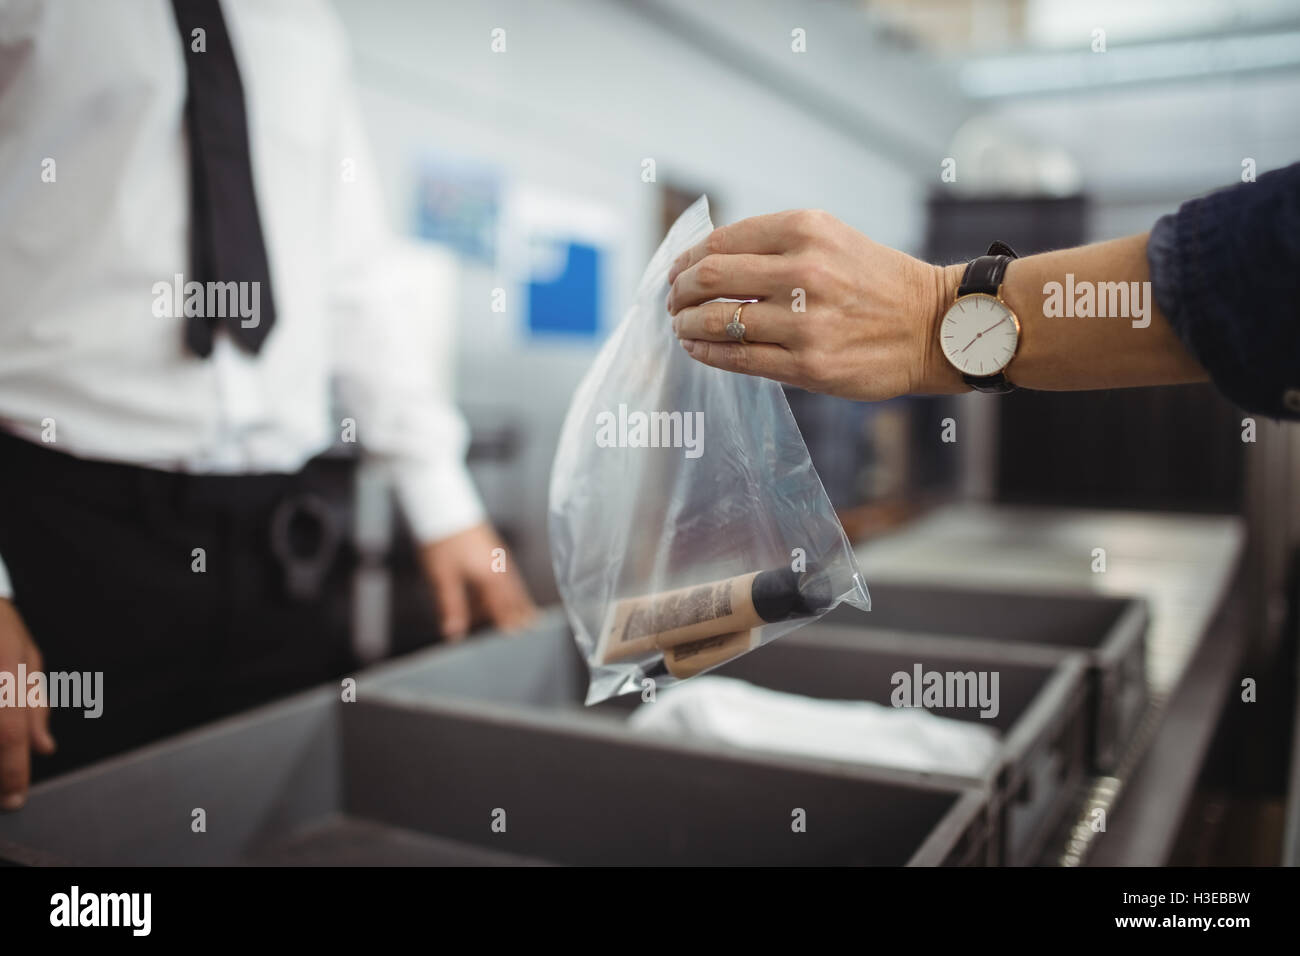 Passenger putting plastic bag into tray for security check Stock Photo